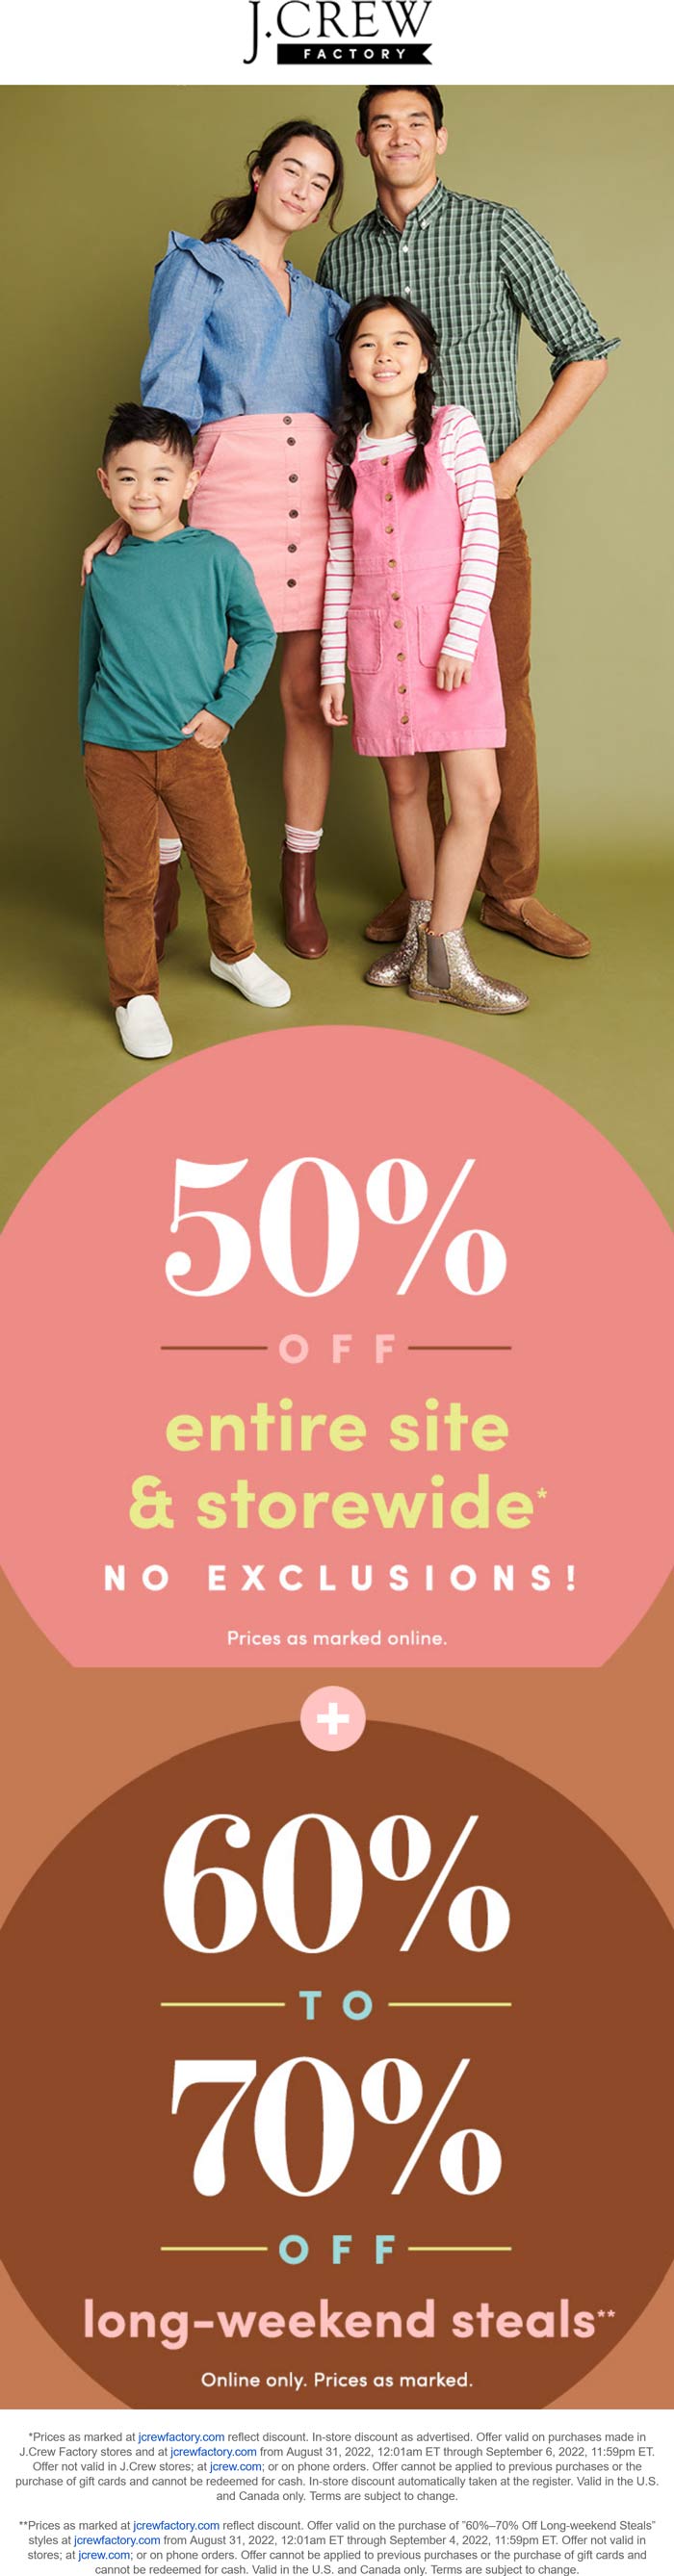 J.Crew Factory stores Coupon  50% off everything & more at J.Crew Factory, ditto online #jcrewfactory 